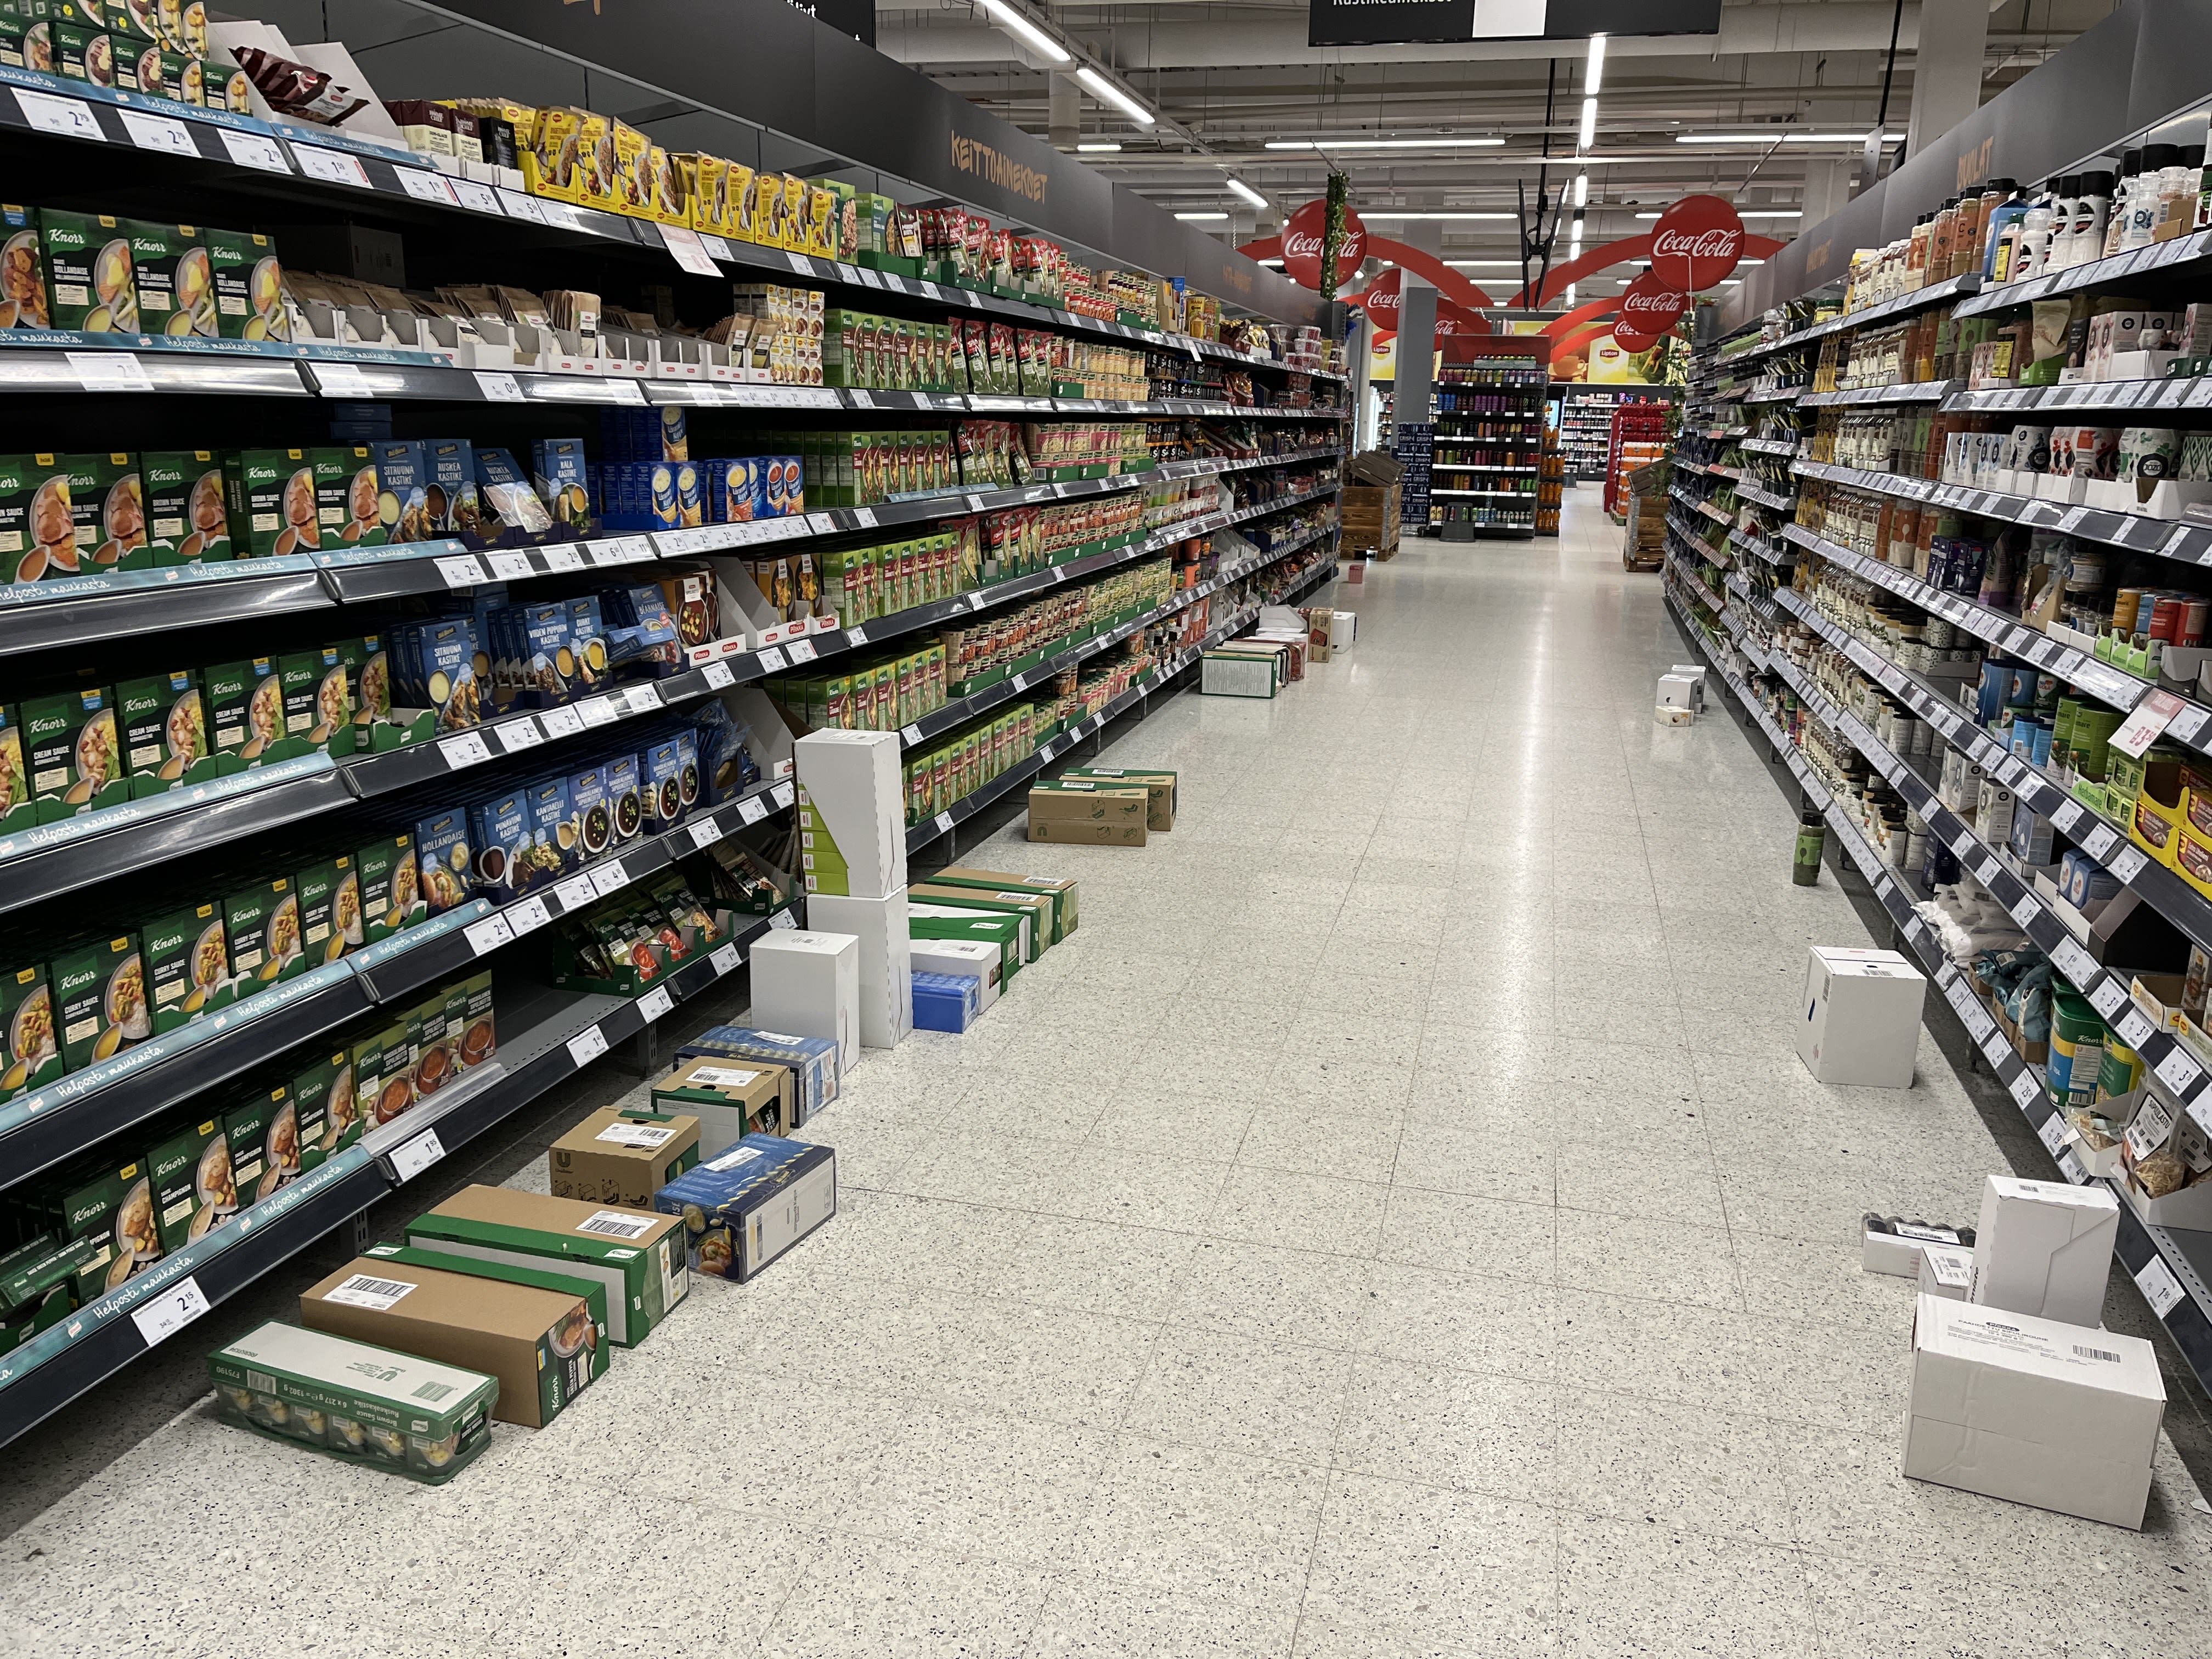 Supermarkets are opening, but there will be shortages